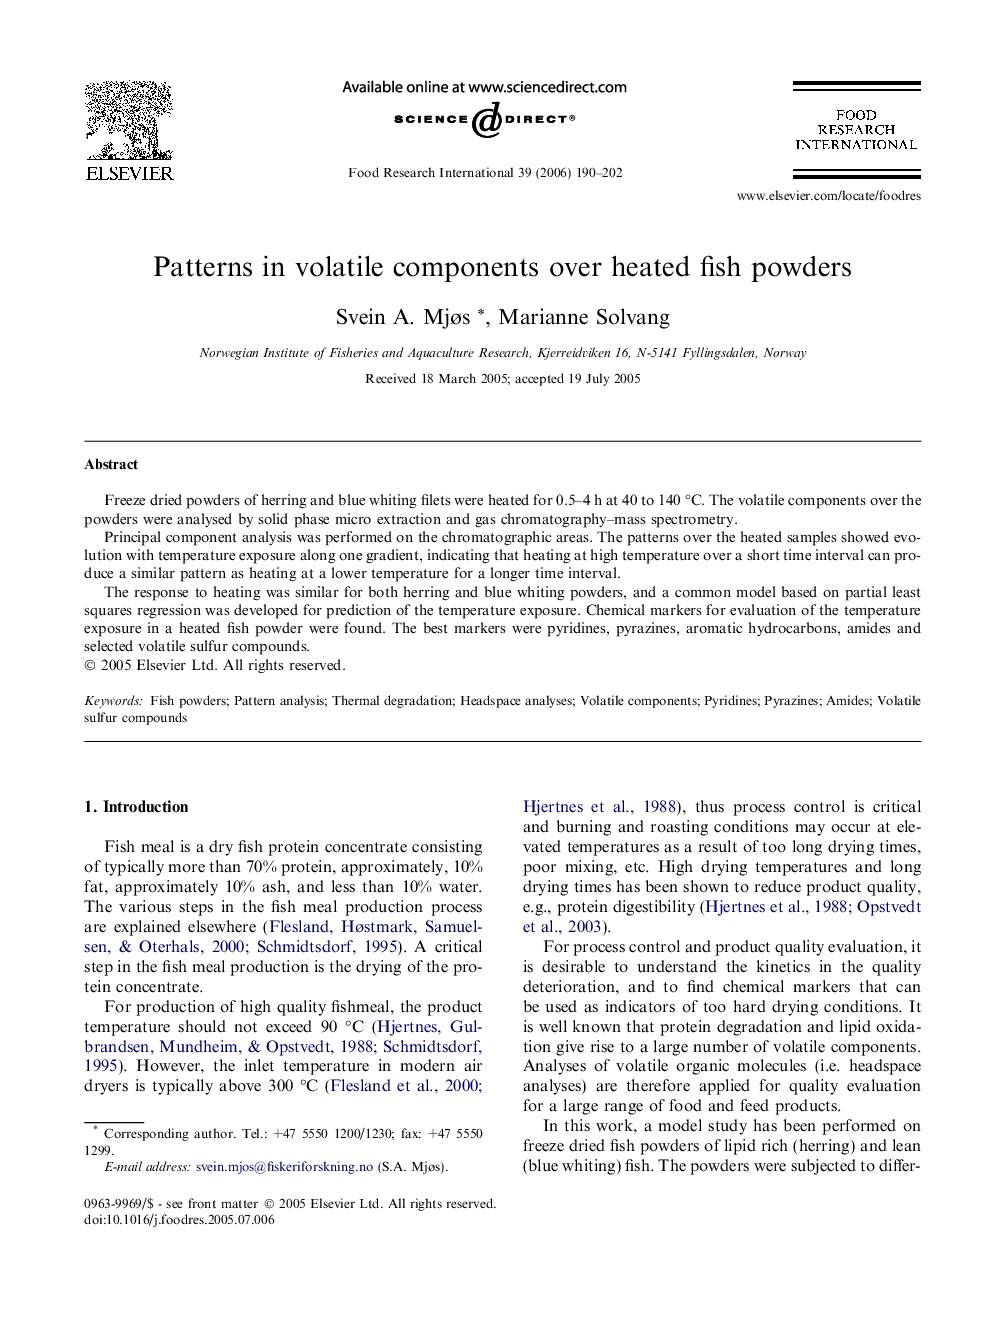 Patterns in volatile components over heated fish powders